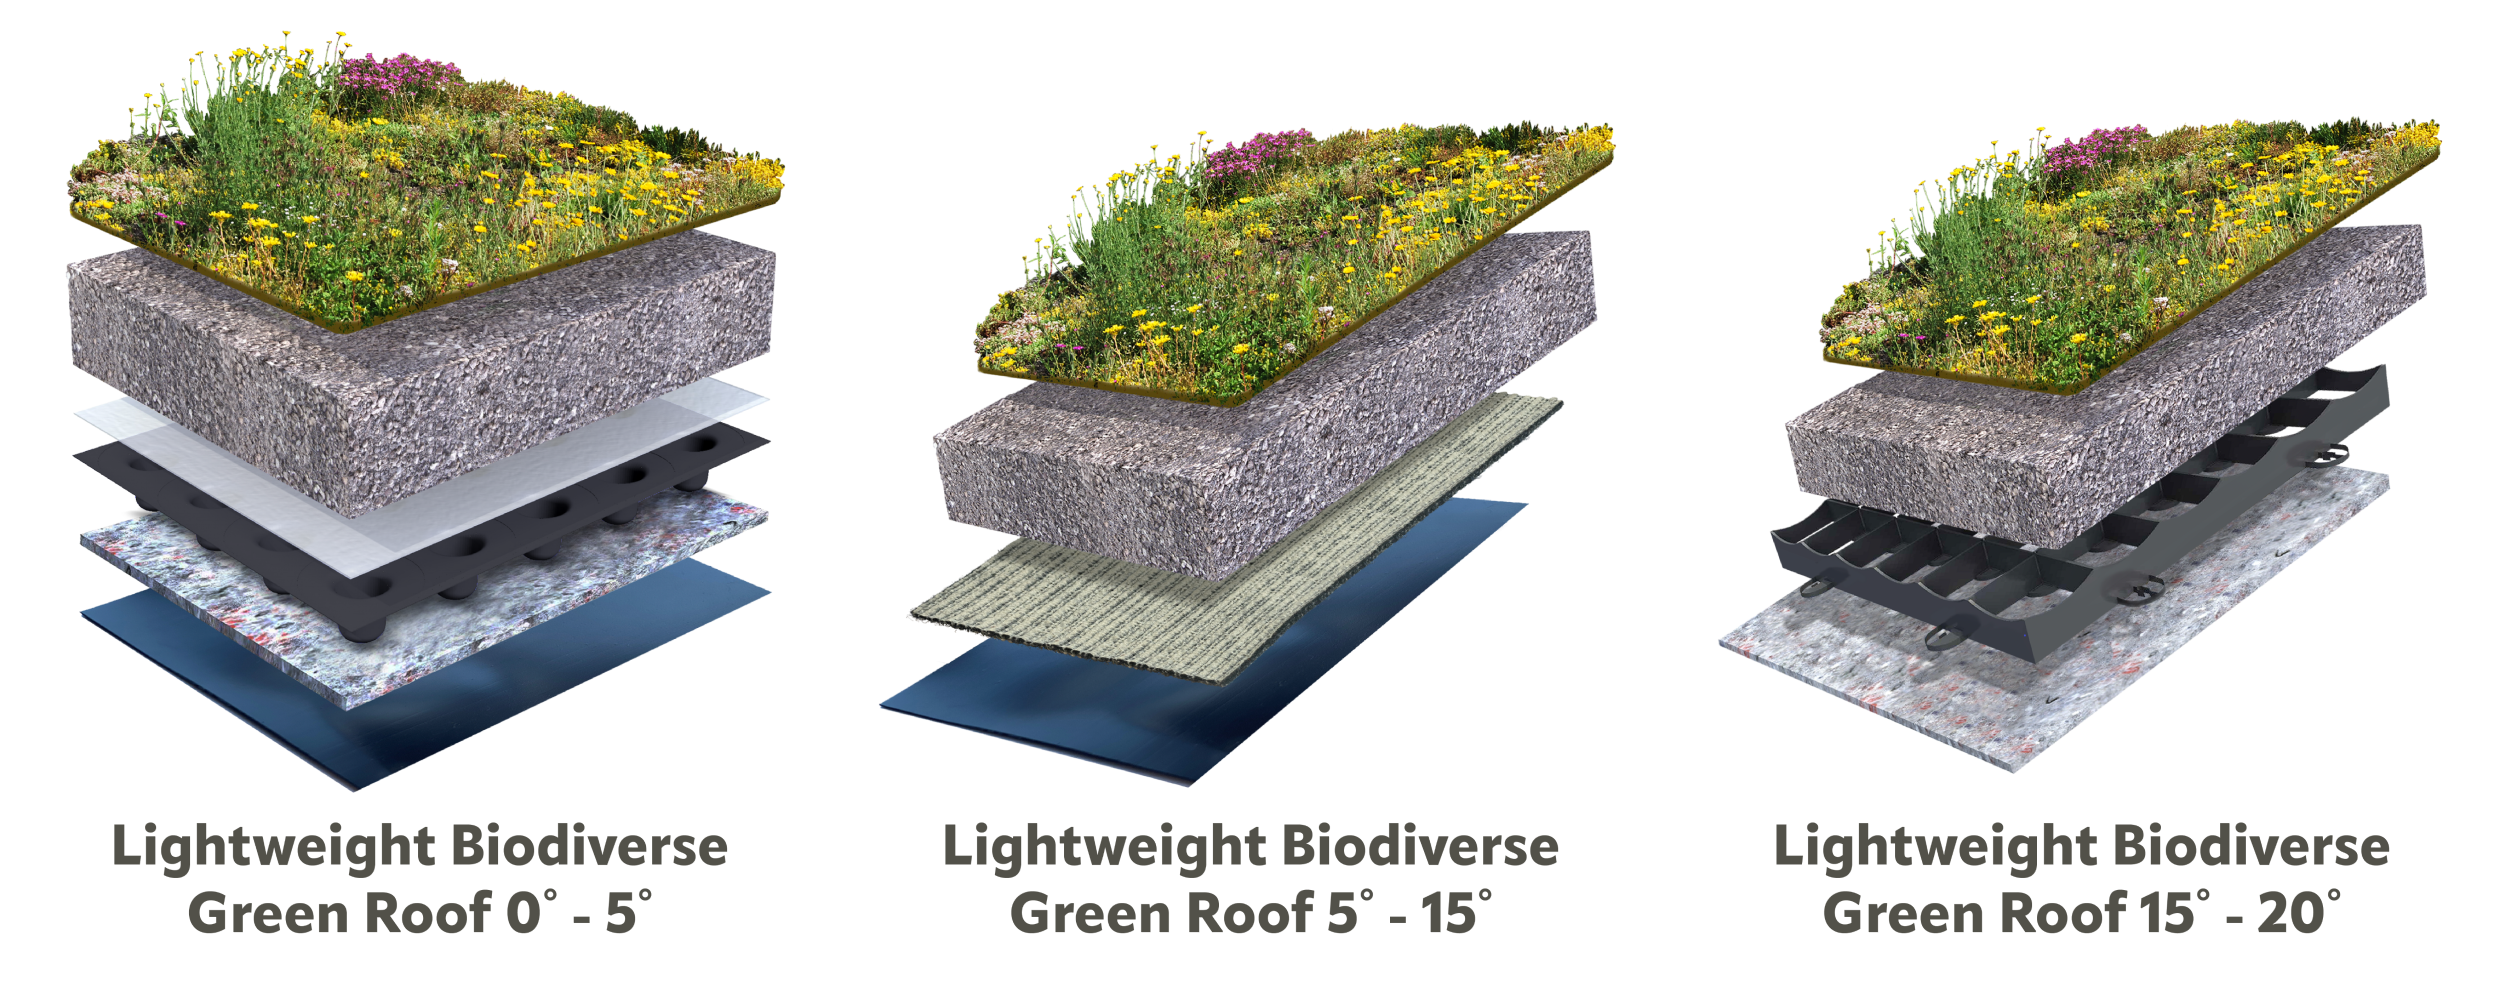 Flat and gently sloping Lightweight Biodiverse green roof systems